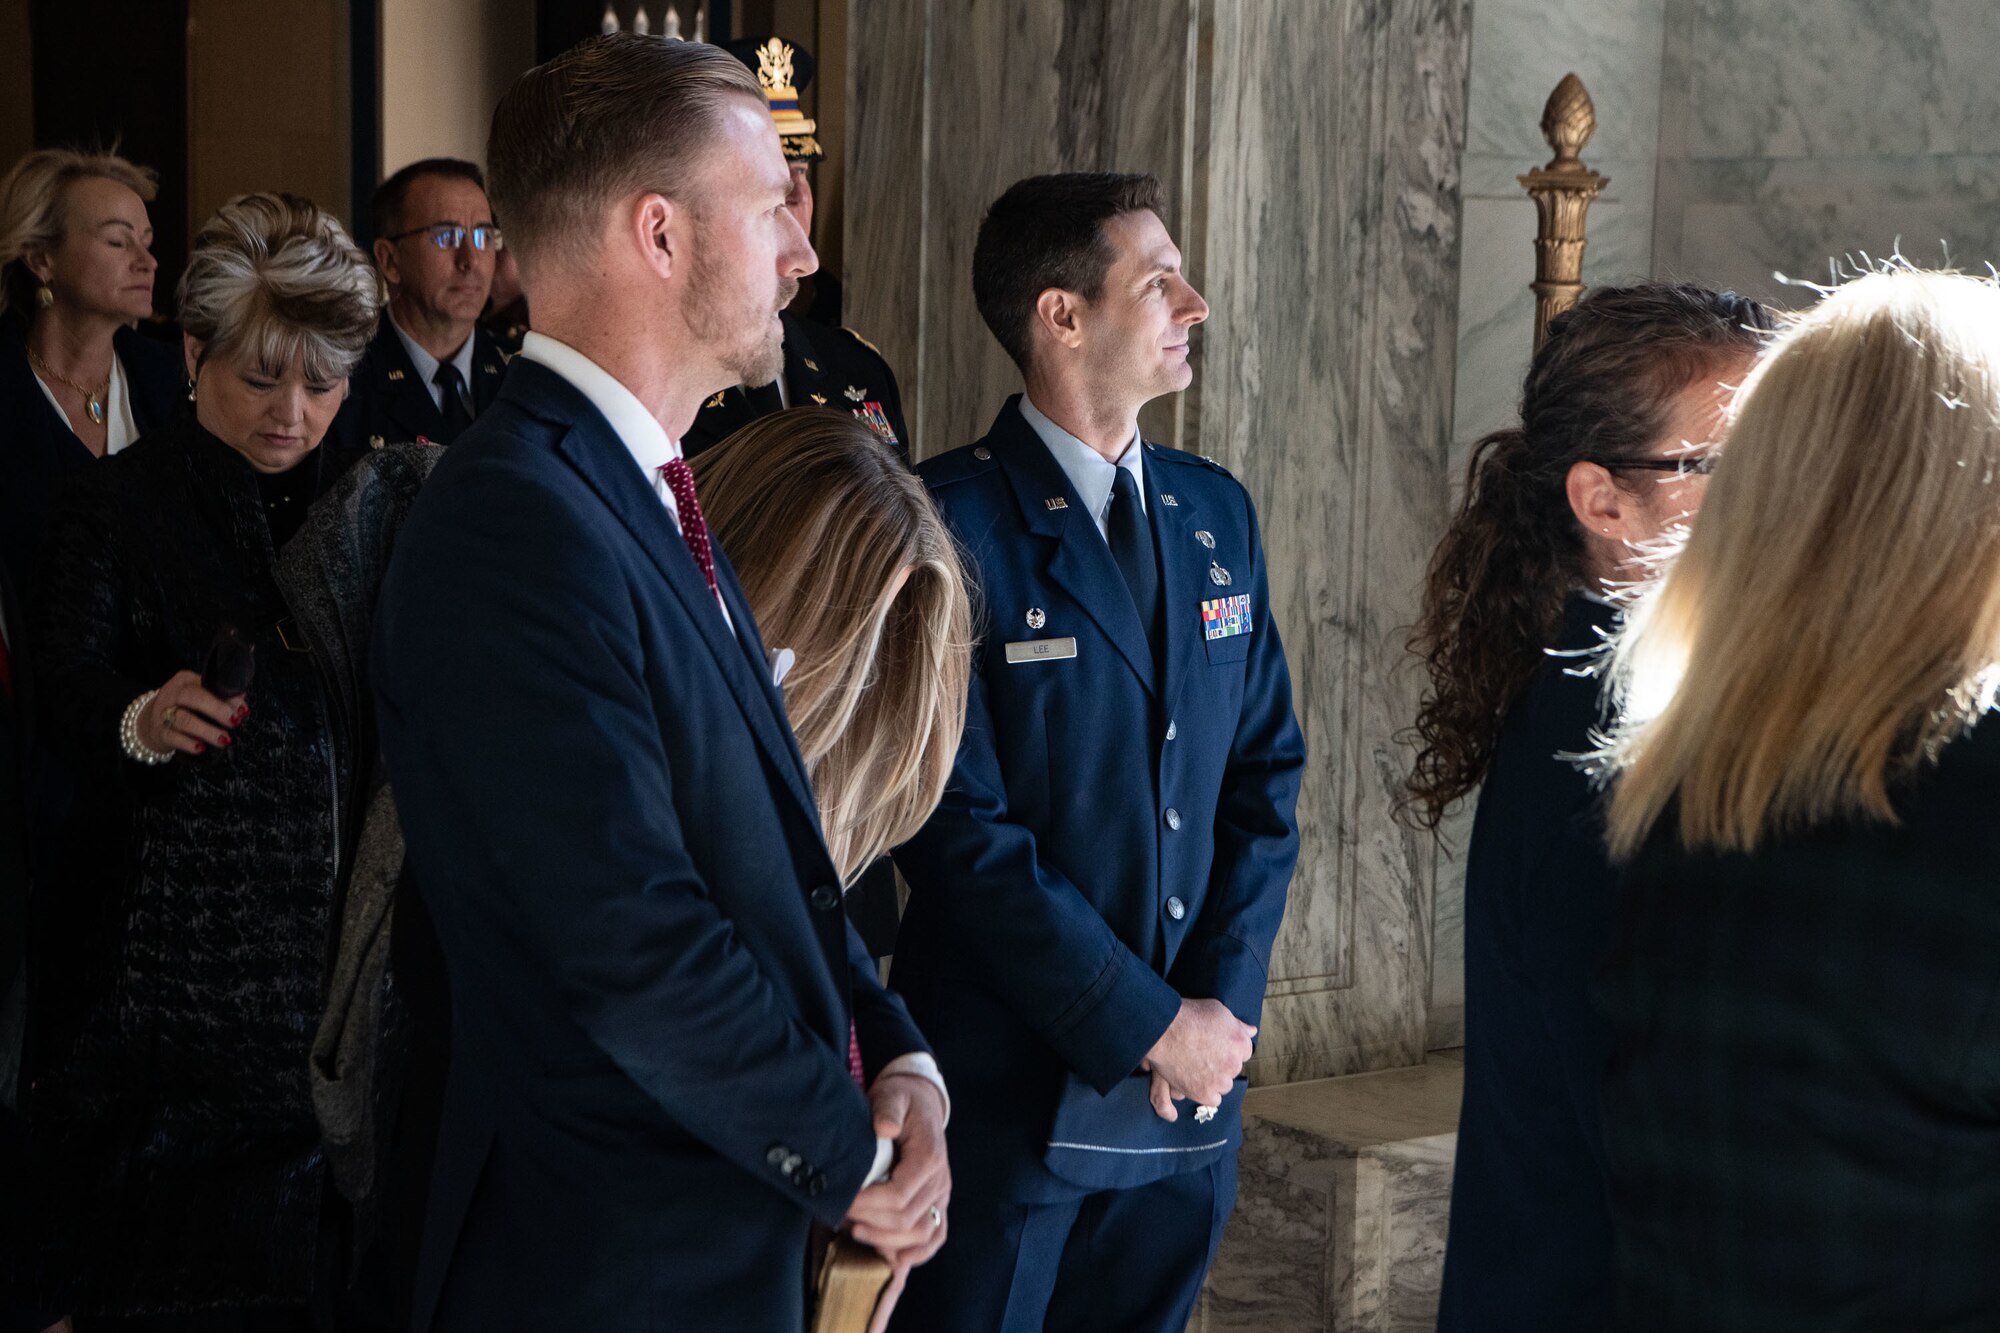 An airman stands alongside people attending the 2023 Oklahoma Governor Inauguration at the Oklahoma State Capitol